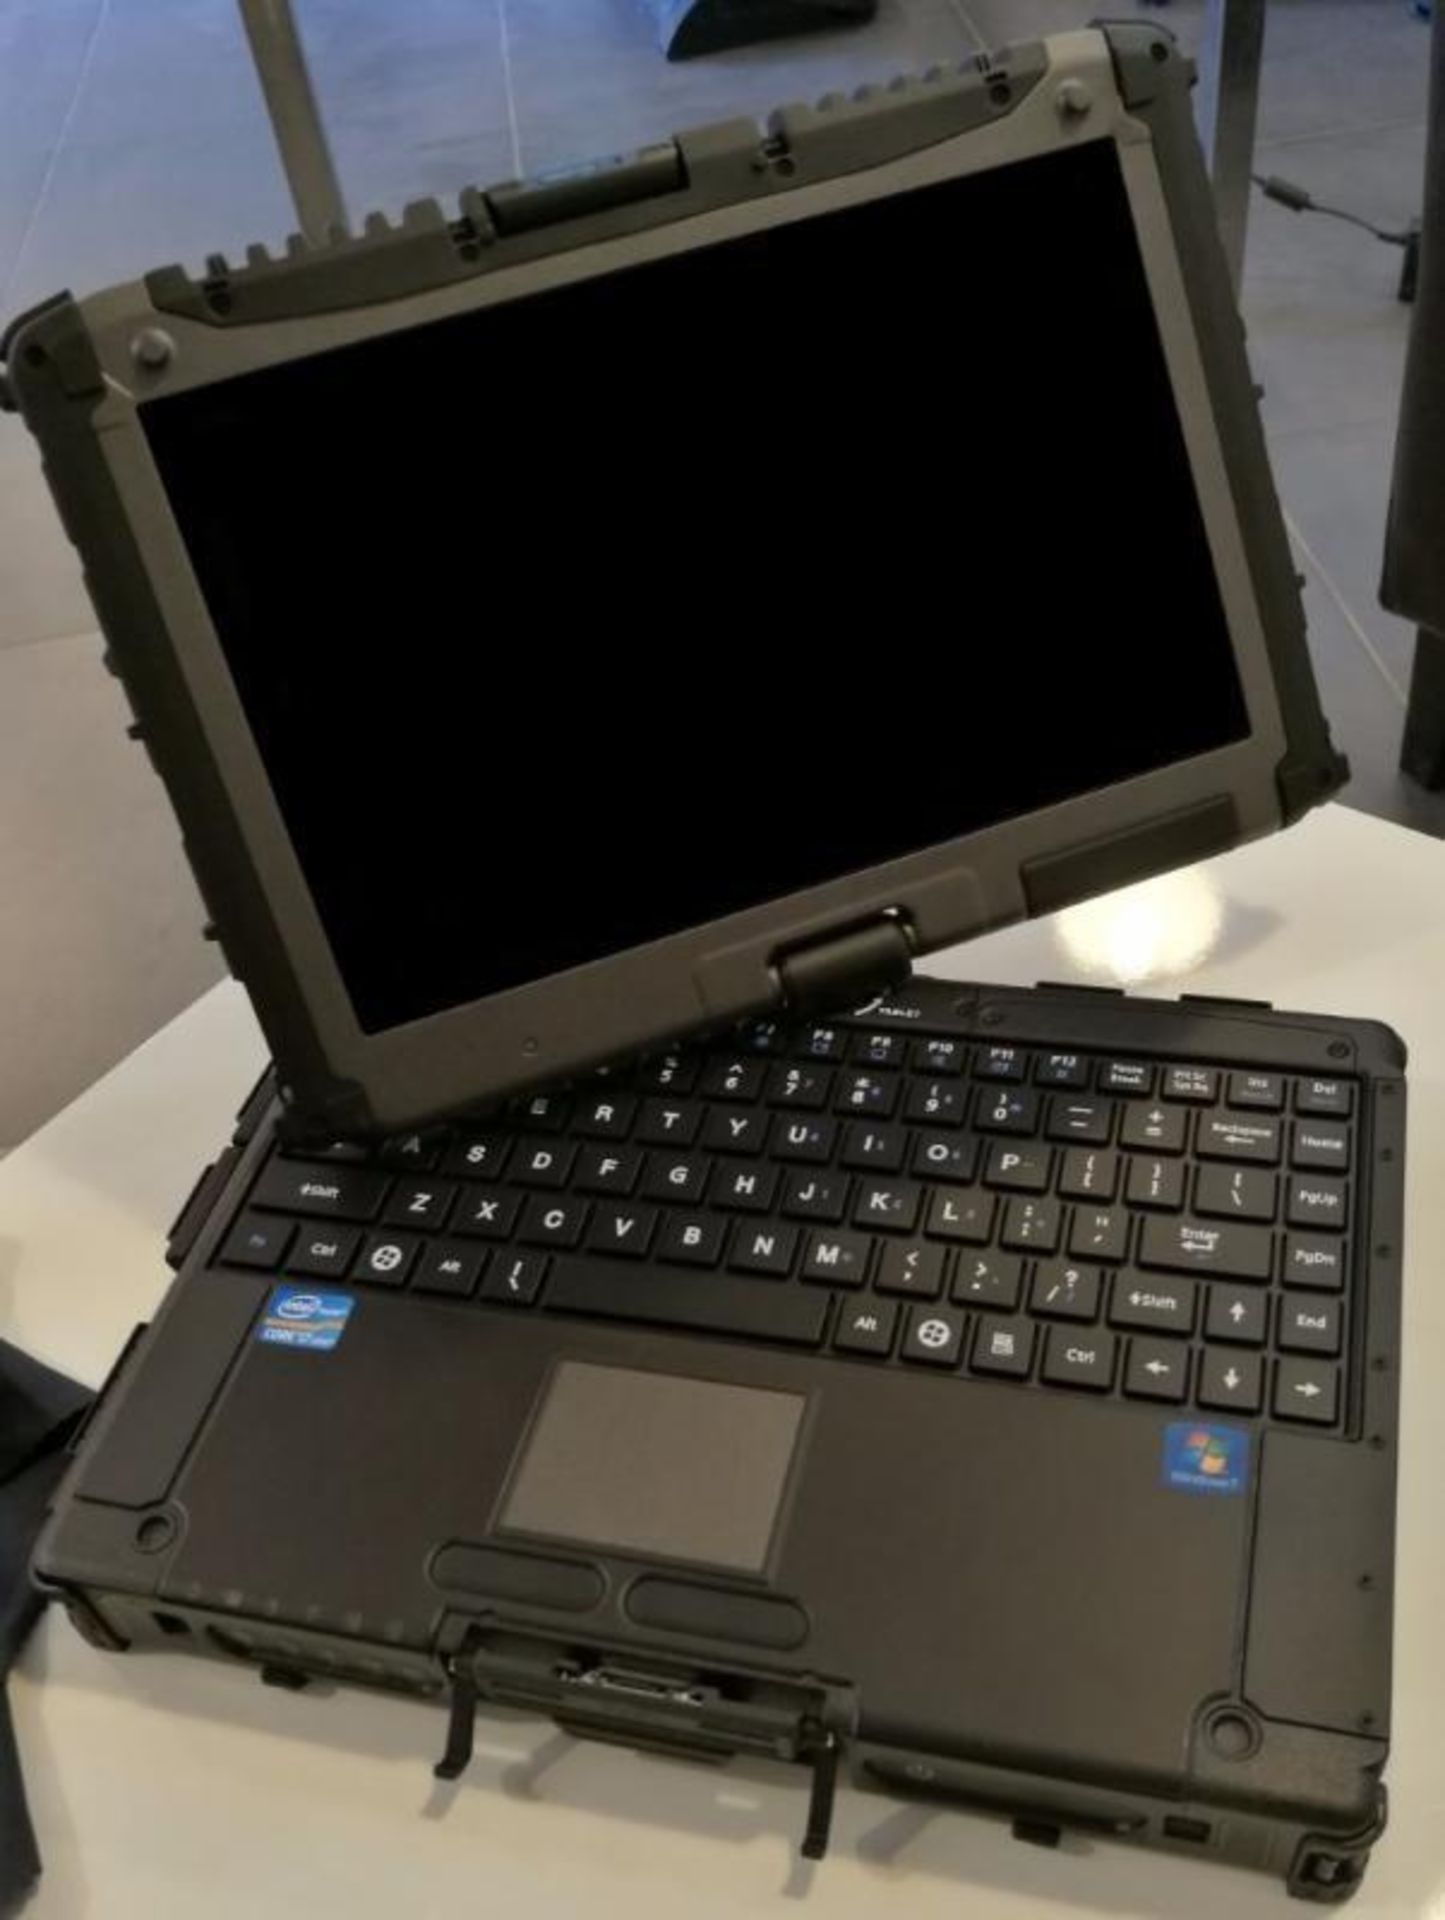 1 x Getac V200 Rugged Laptop Computer - Rugged Laptop That Transforms into a Tablet PC - Features an - Image 5 of 8